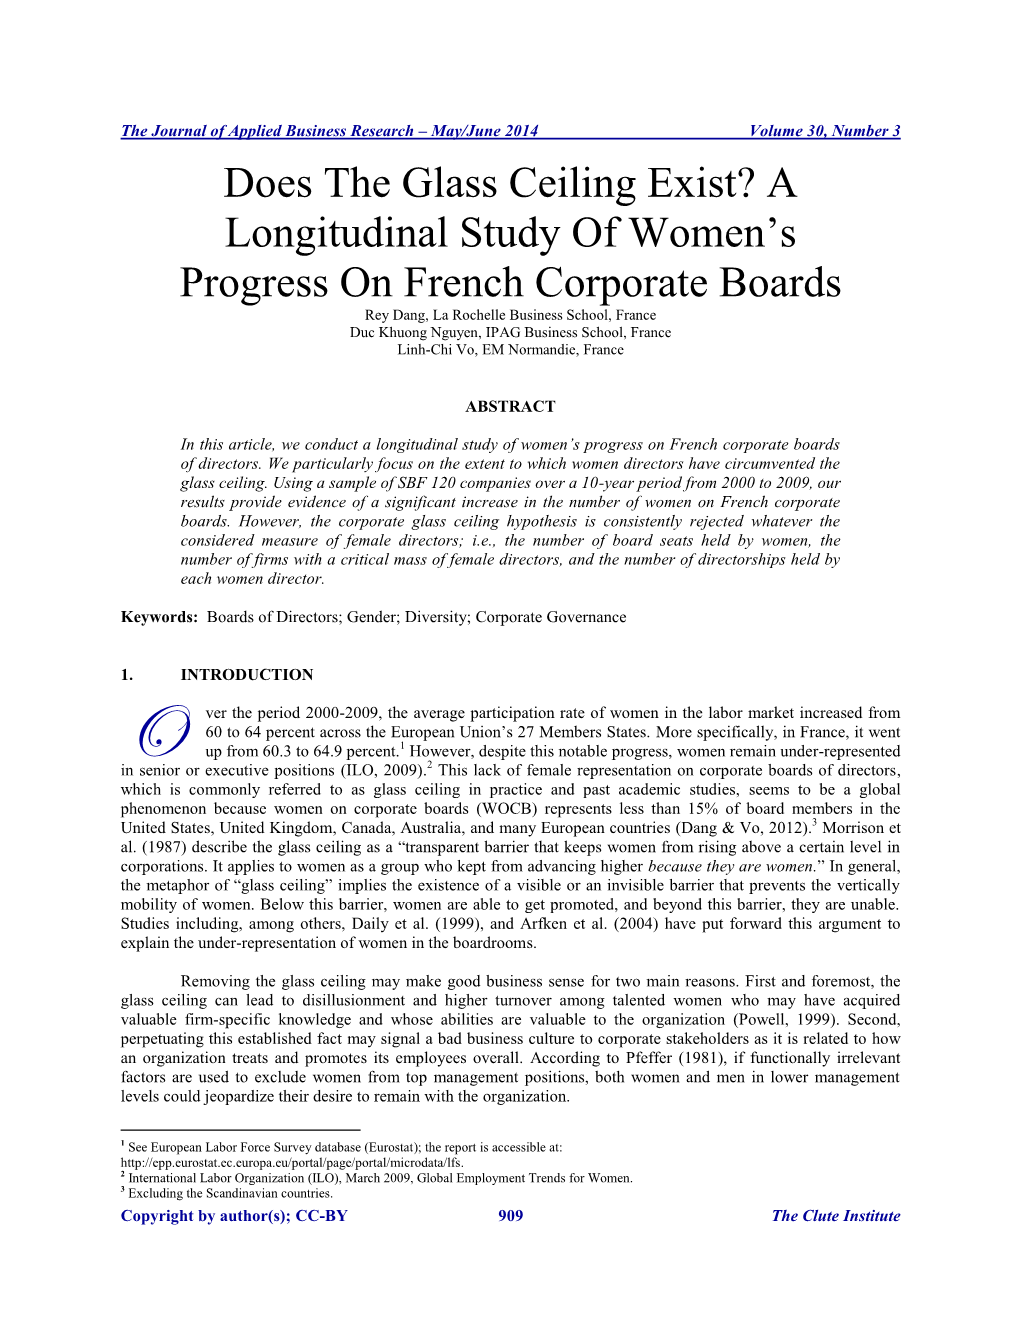 Does the Glass Ceiling Exist? a Longitudinal Study of Women's